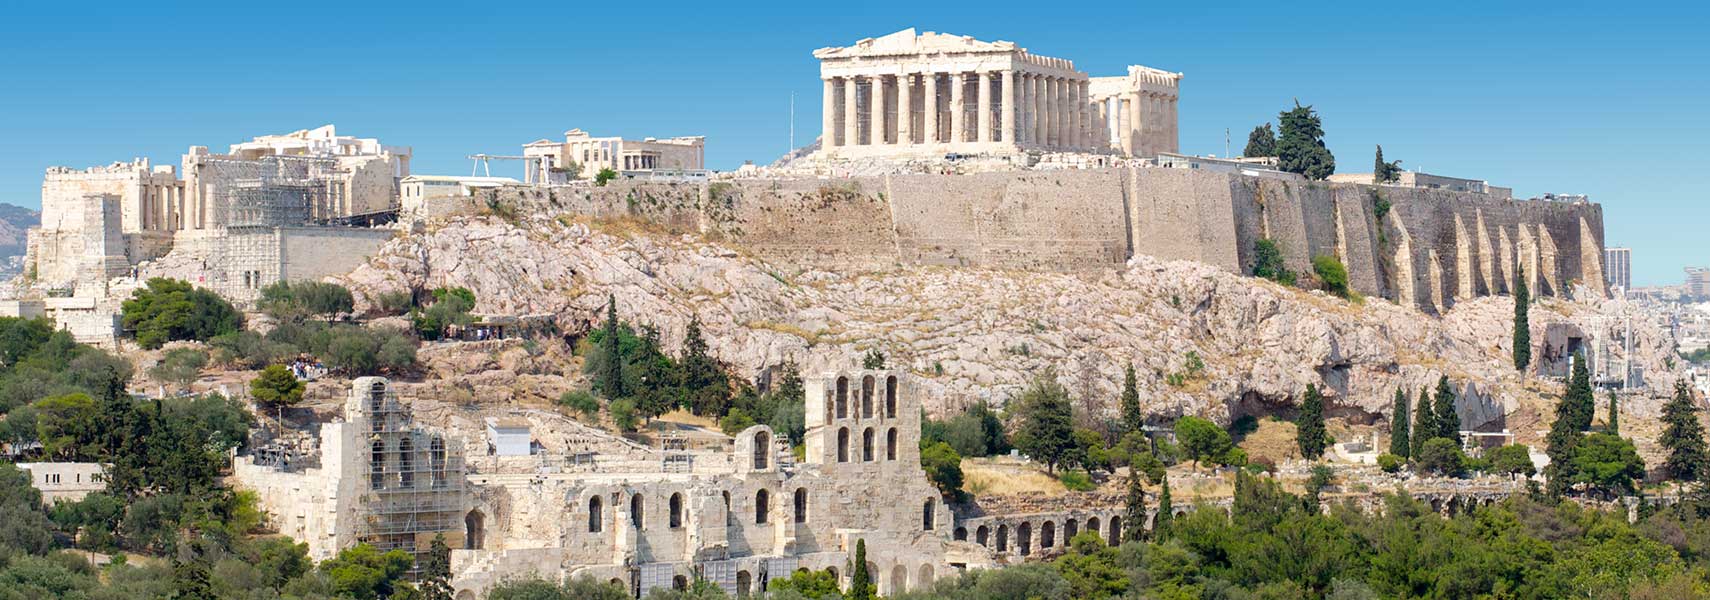 20 Buildings in Europe Every Architect must visit - Acropolis, Athens, Greece